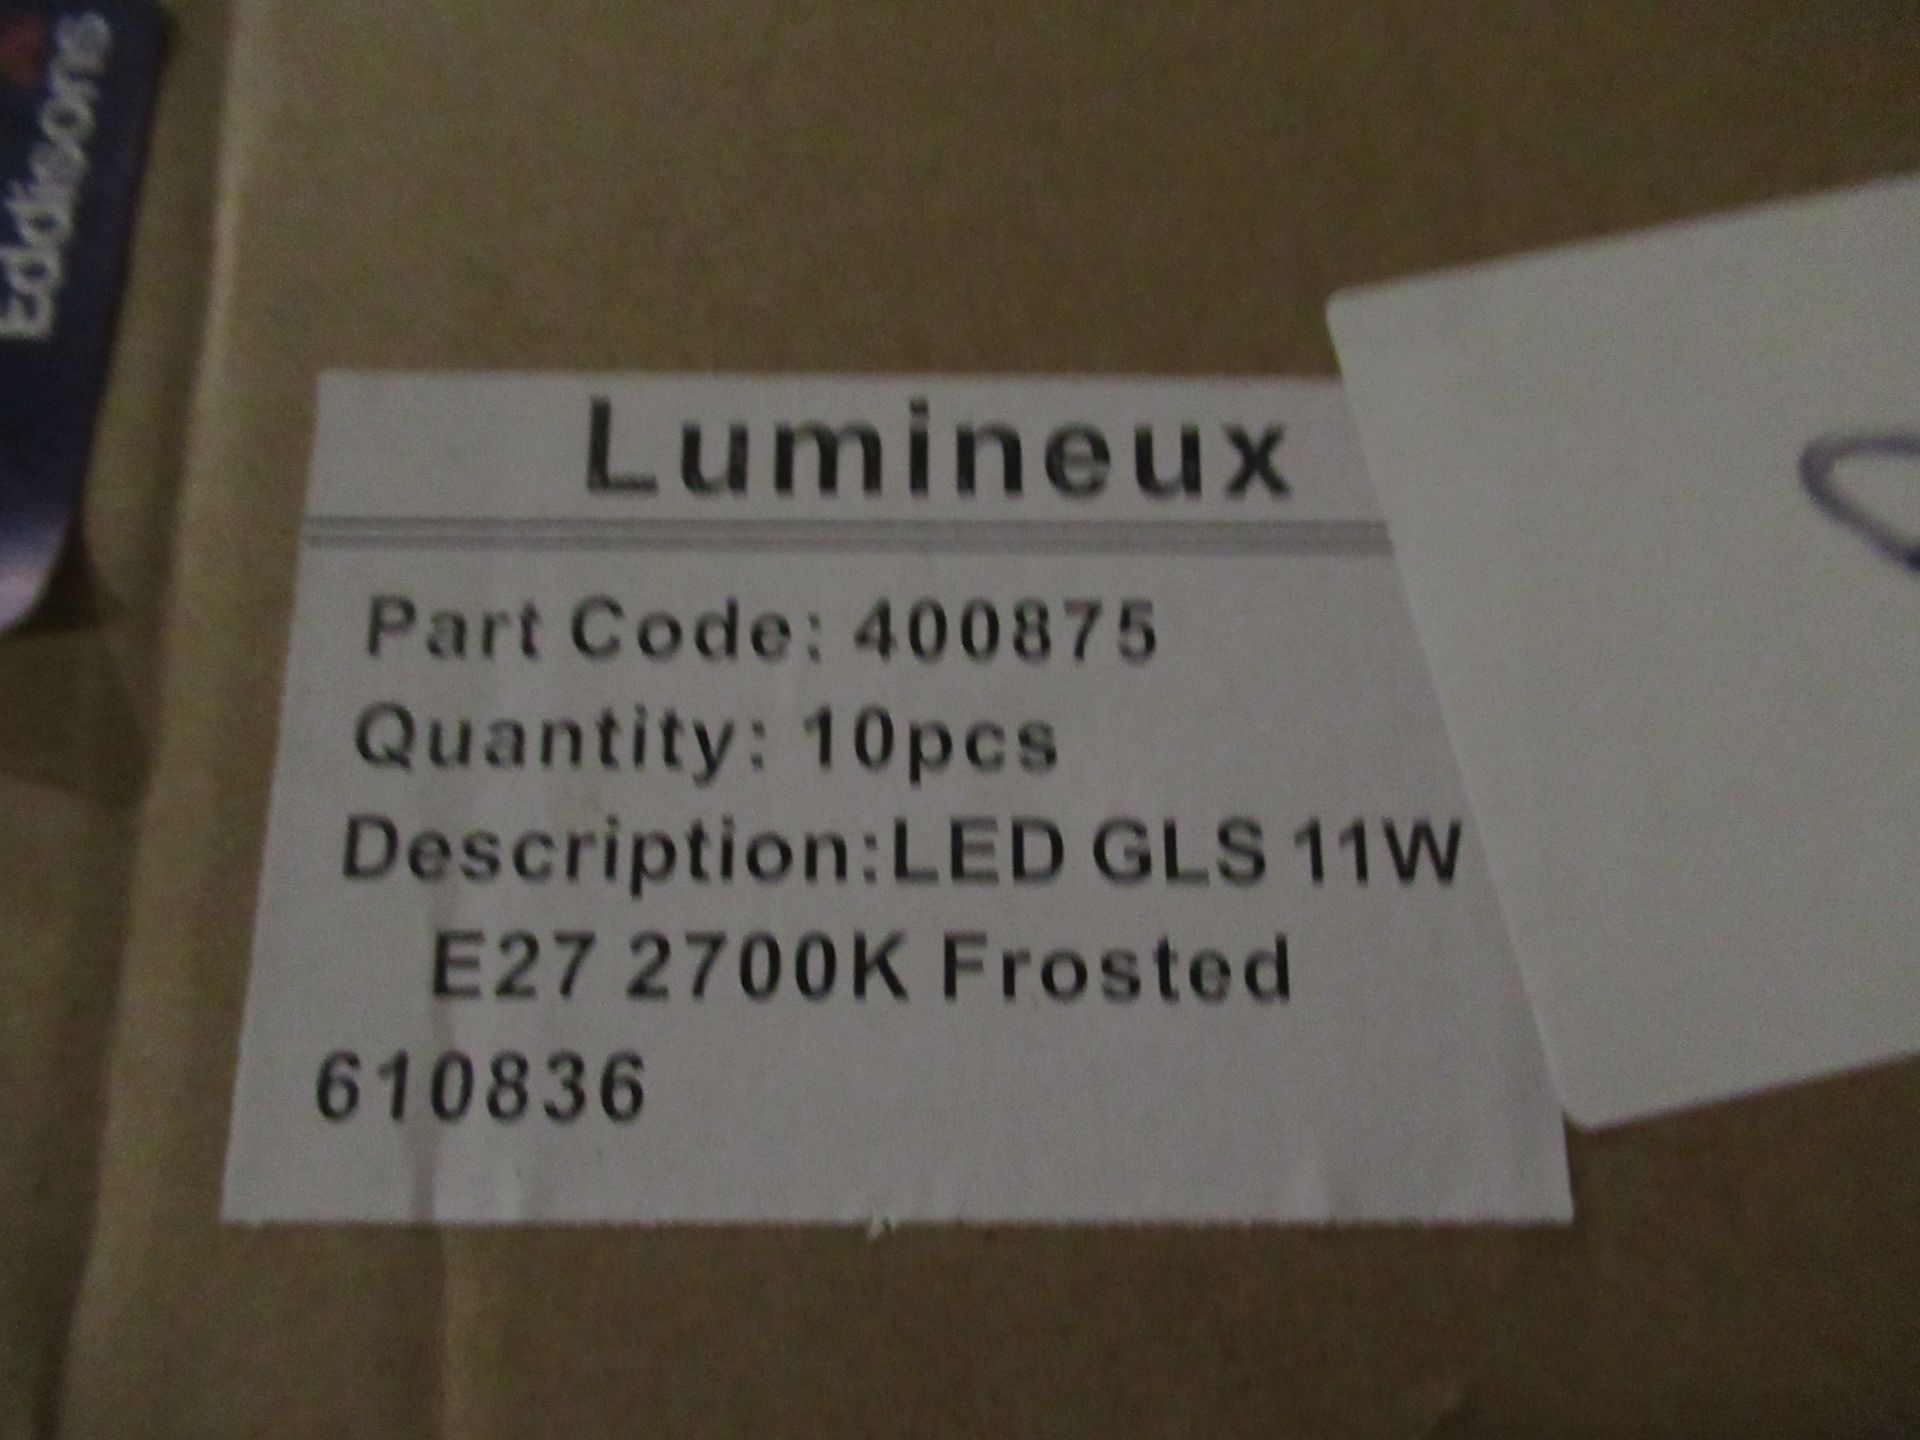 50 x LED GLS 11W E27 2700K Dimmable Frosted - Image 2 of 6